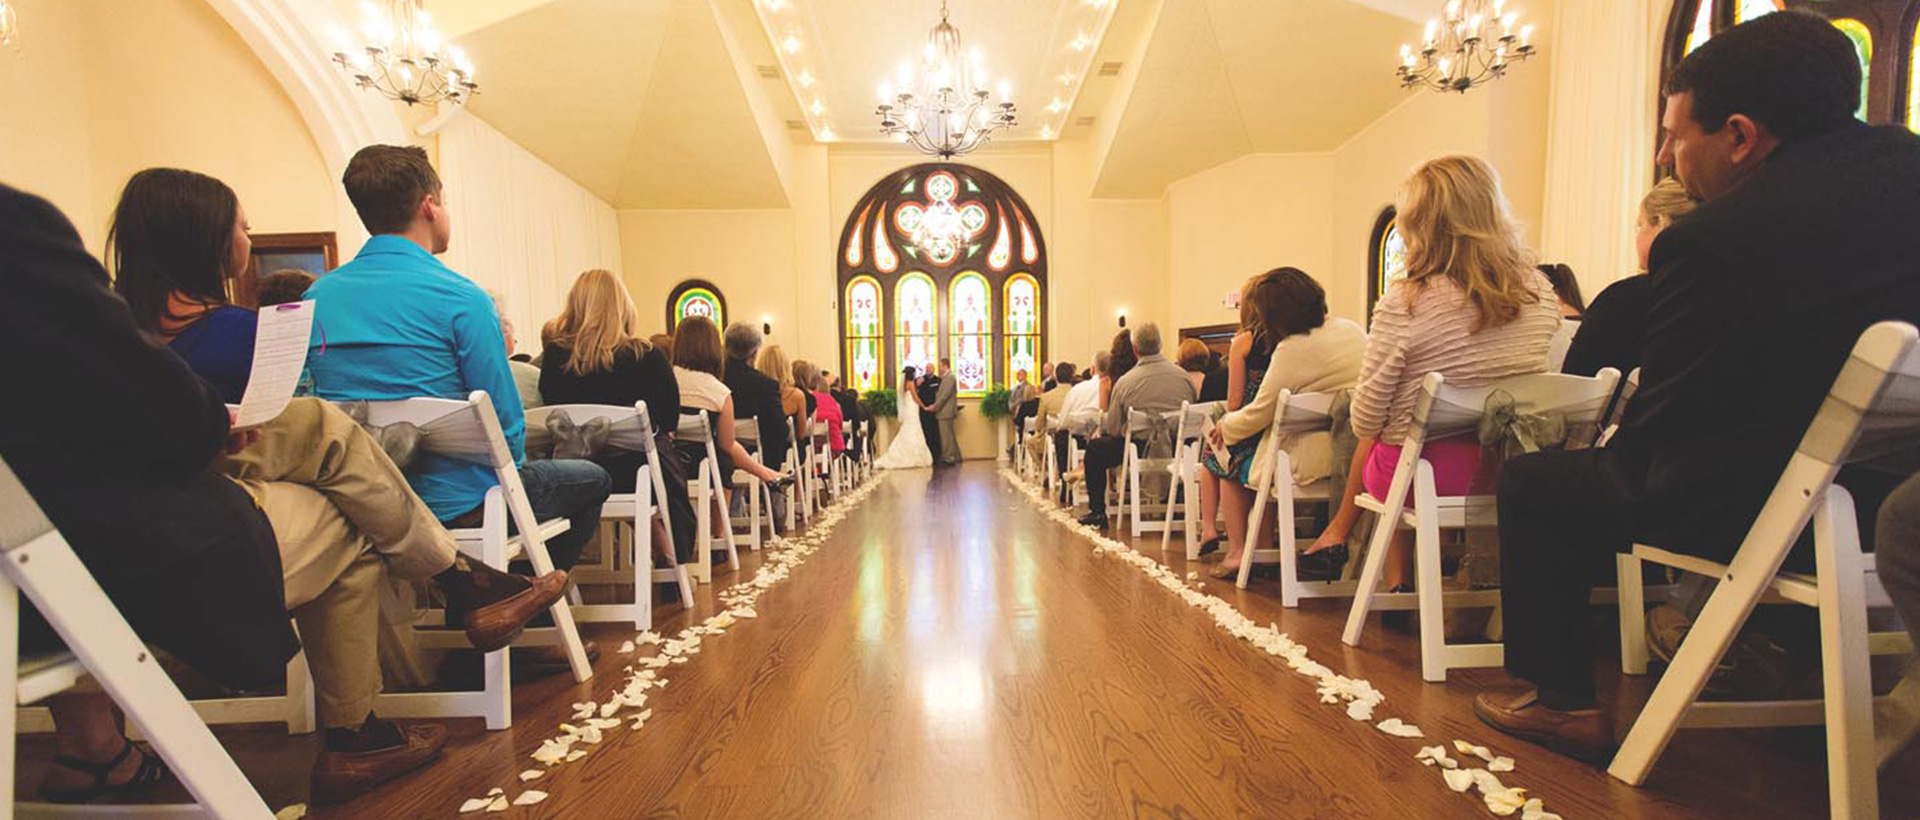 Wedding Ceremonies and Receptions in Downtown Chattanooga